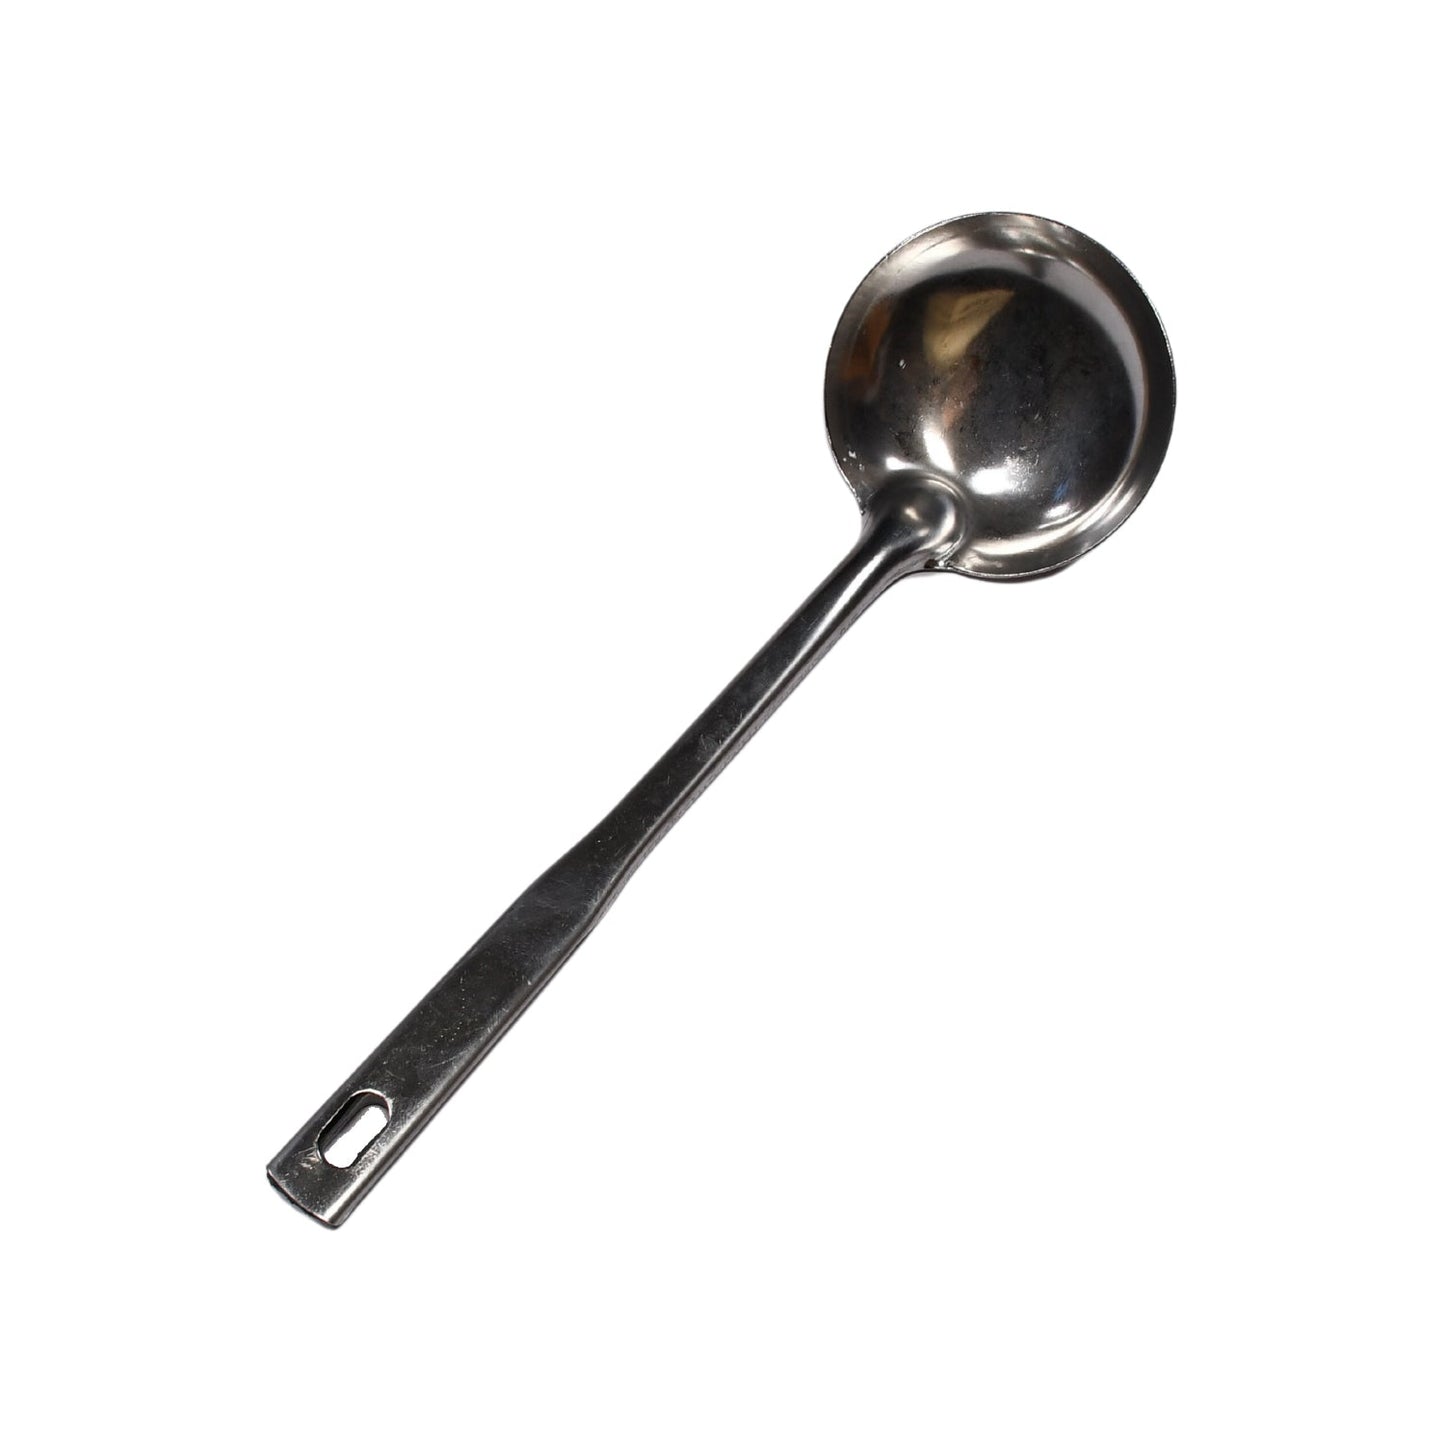 7002 Stainless Steel Kitchen Cooking Ladles, Serving Spoons Set of (1). 